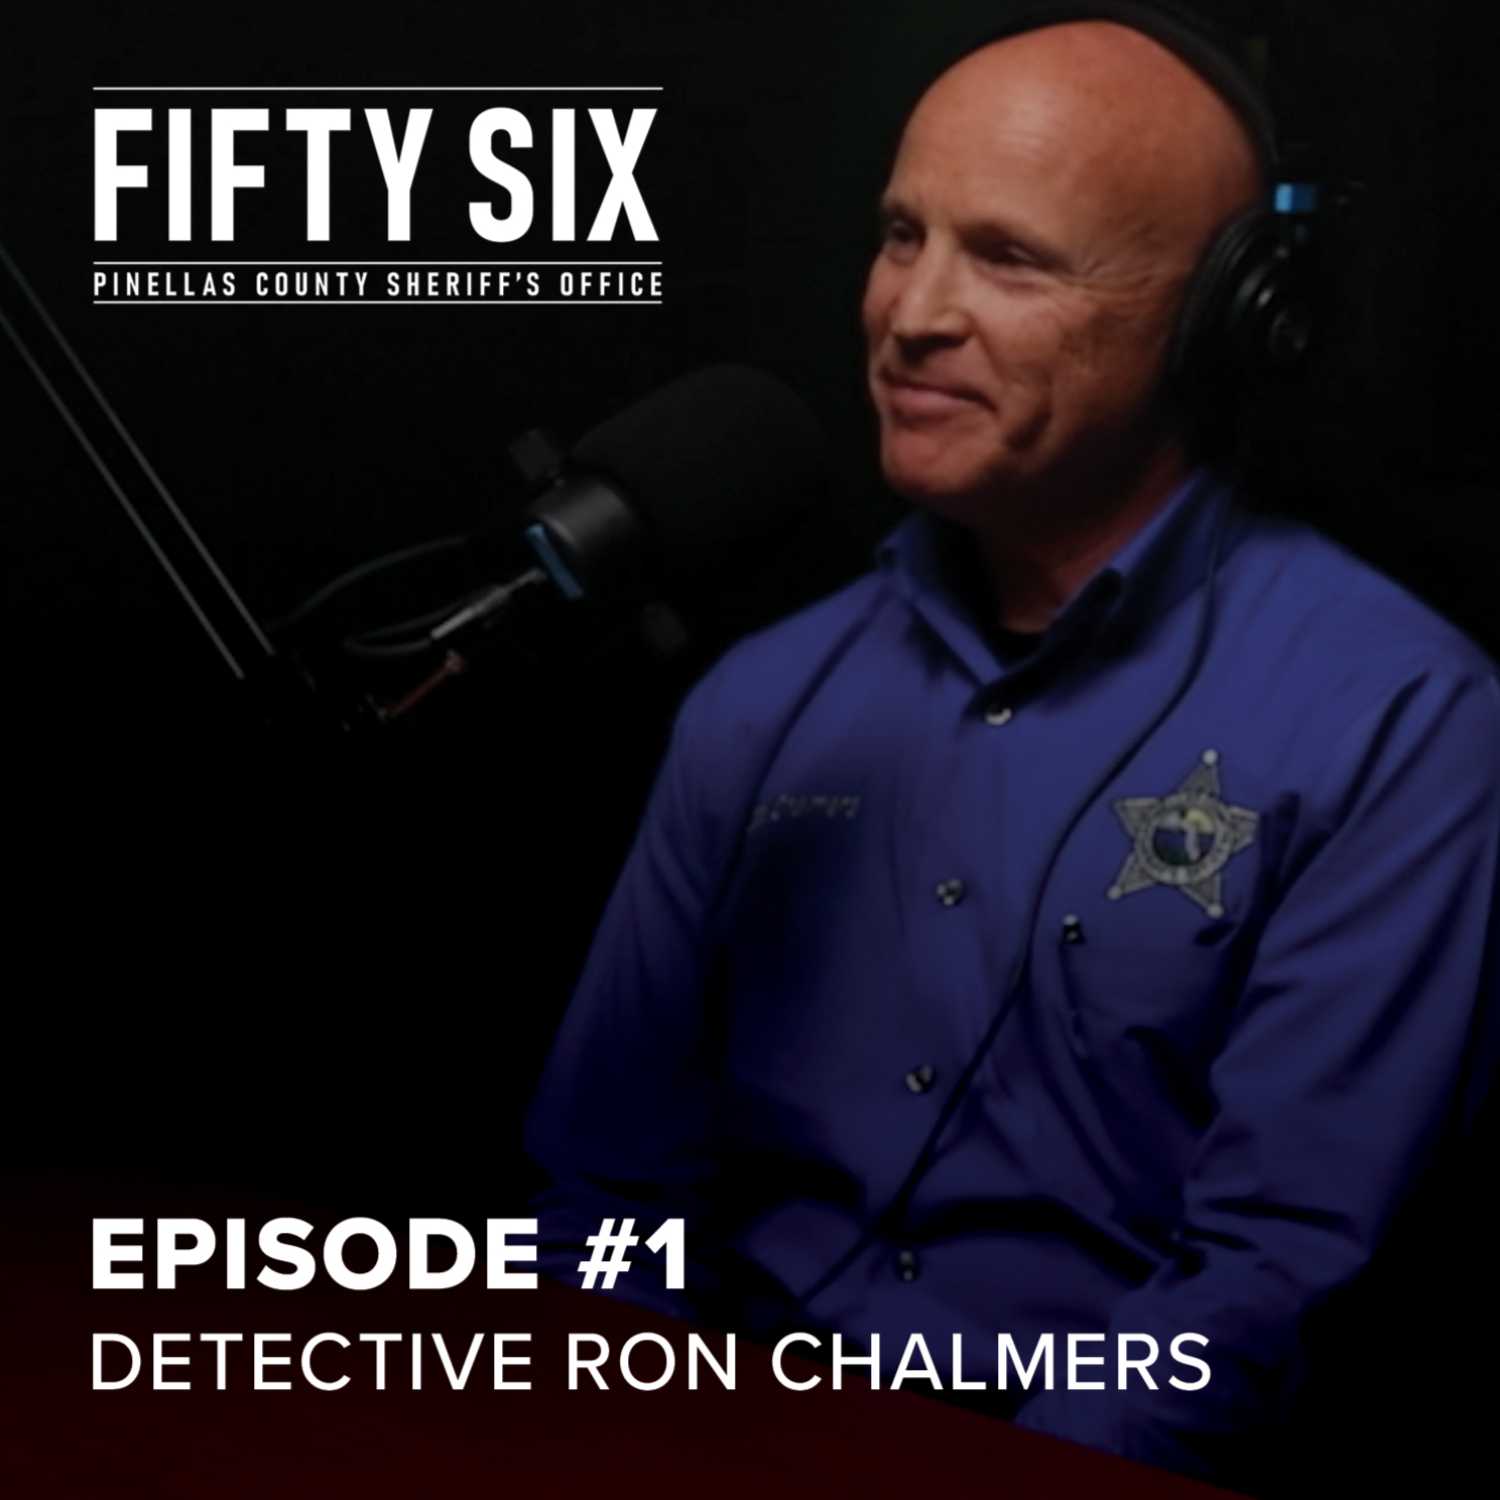 #1 "On the Shoulders of Giants" - Detective Ron Chalmers